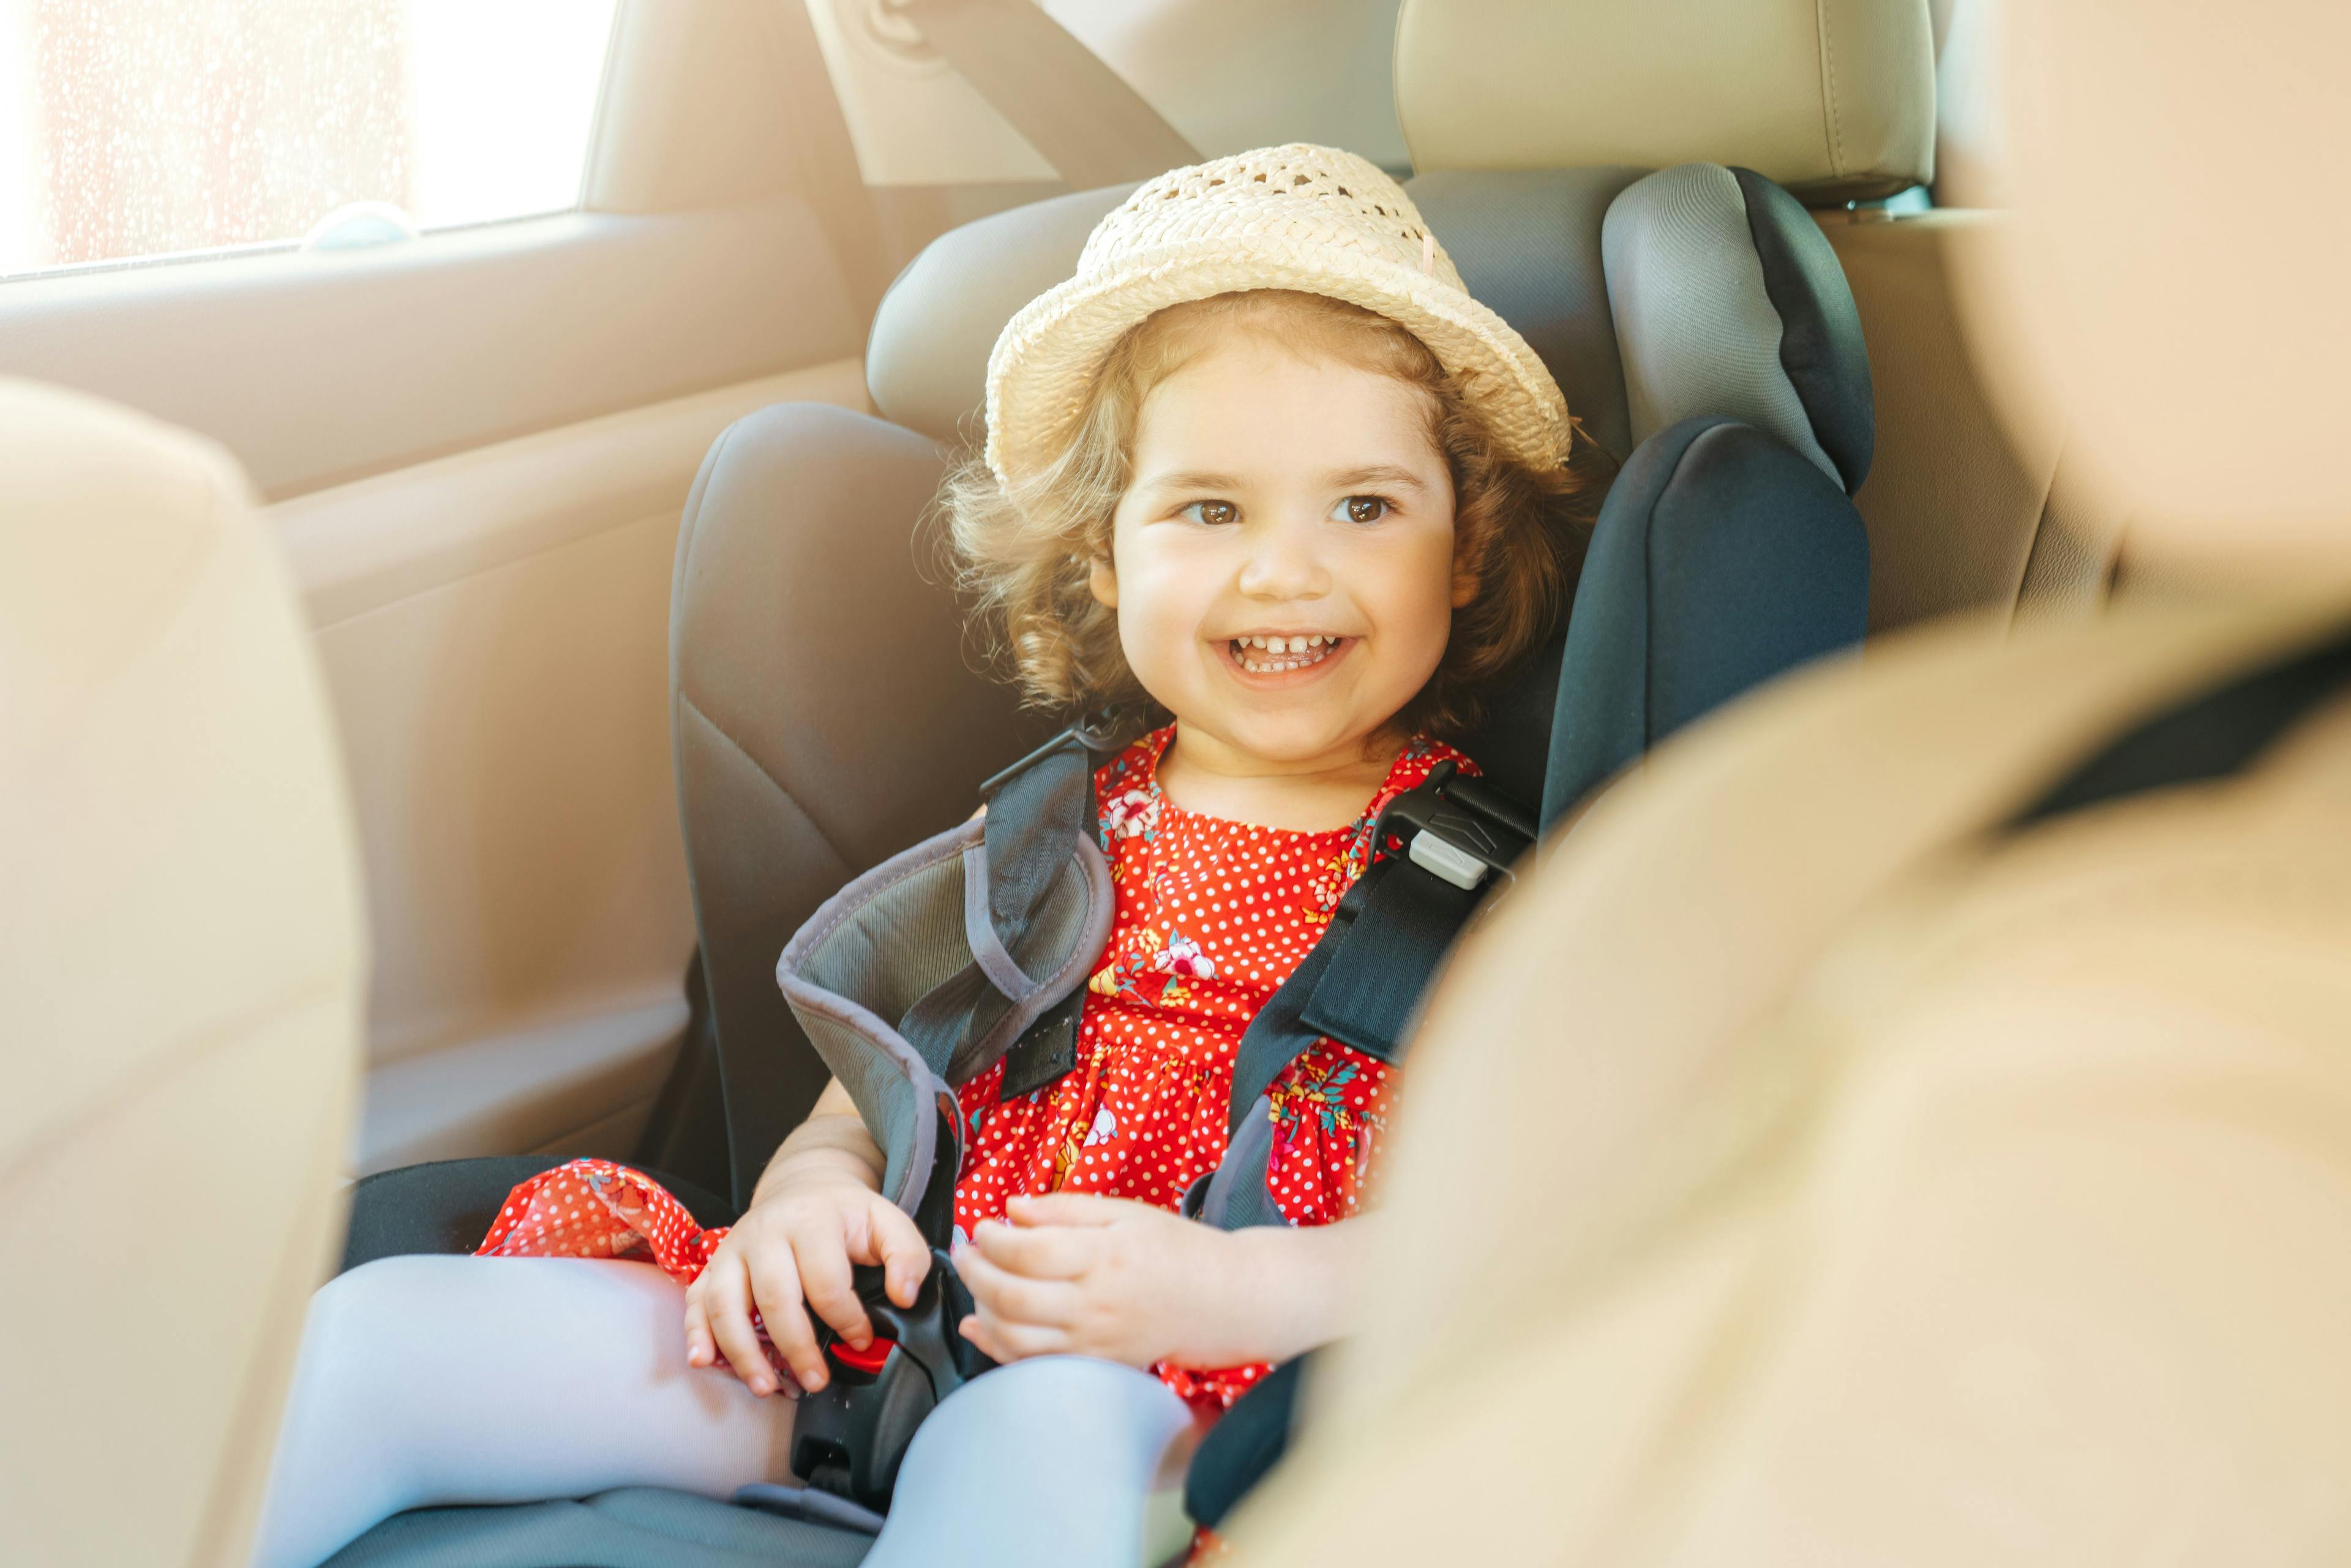 How to protect children in vehicles 